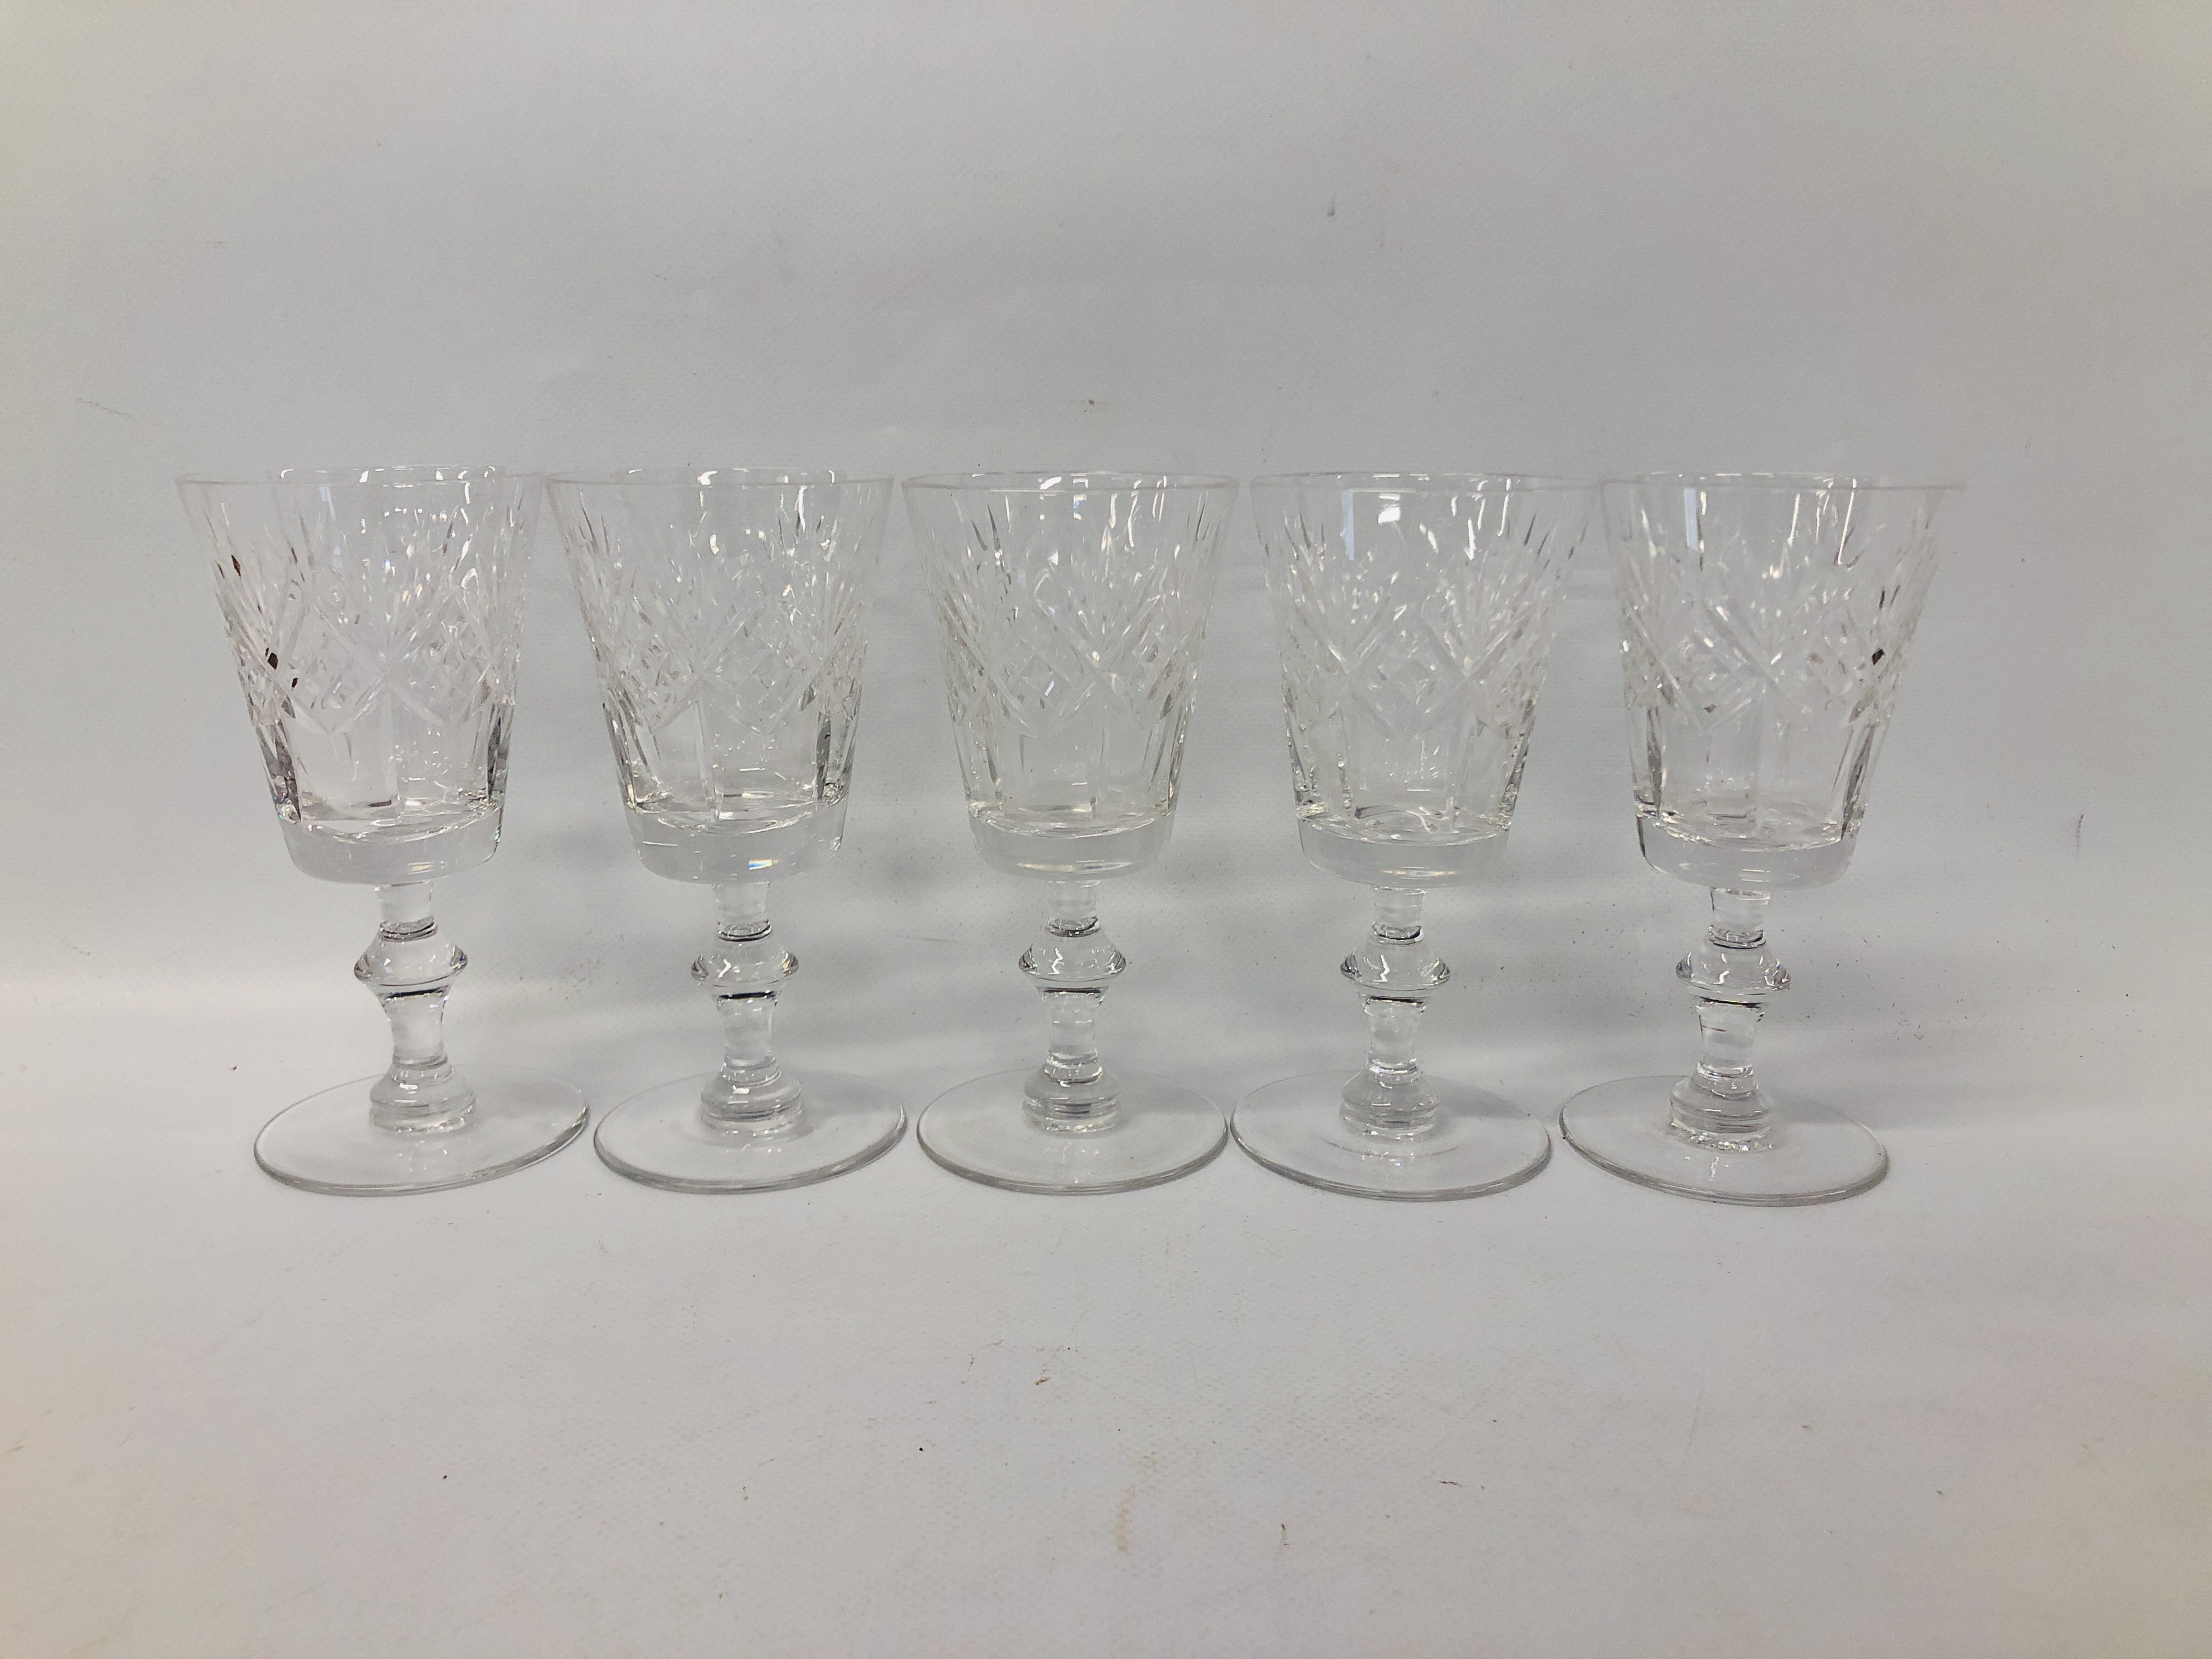 COLLECTION OF GOOD QUALITY CUT GLASS CRYSTAL DRINKING VESSELS ALONG WITH A SET OF 4 HAND PAINTED - Image 7 of 11